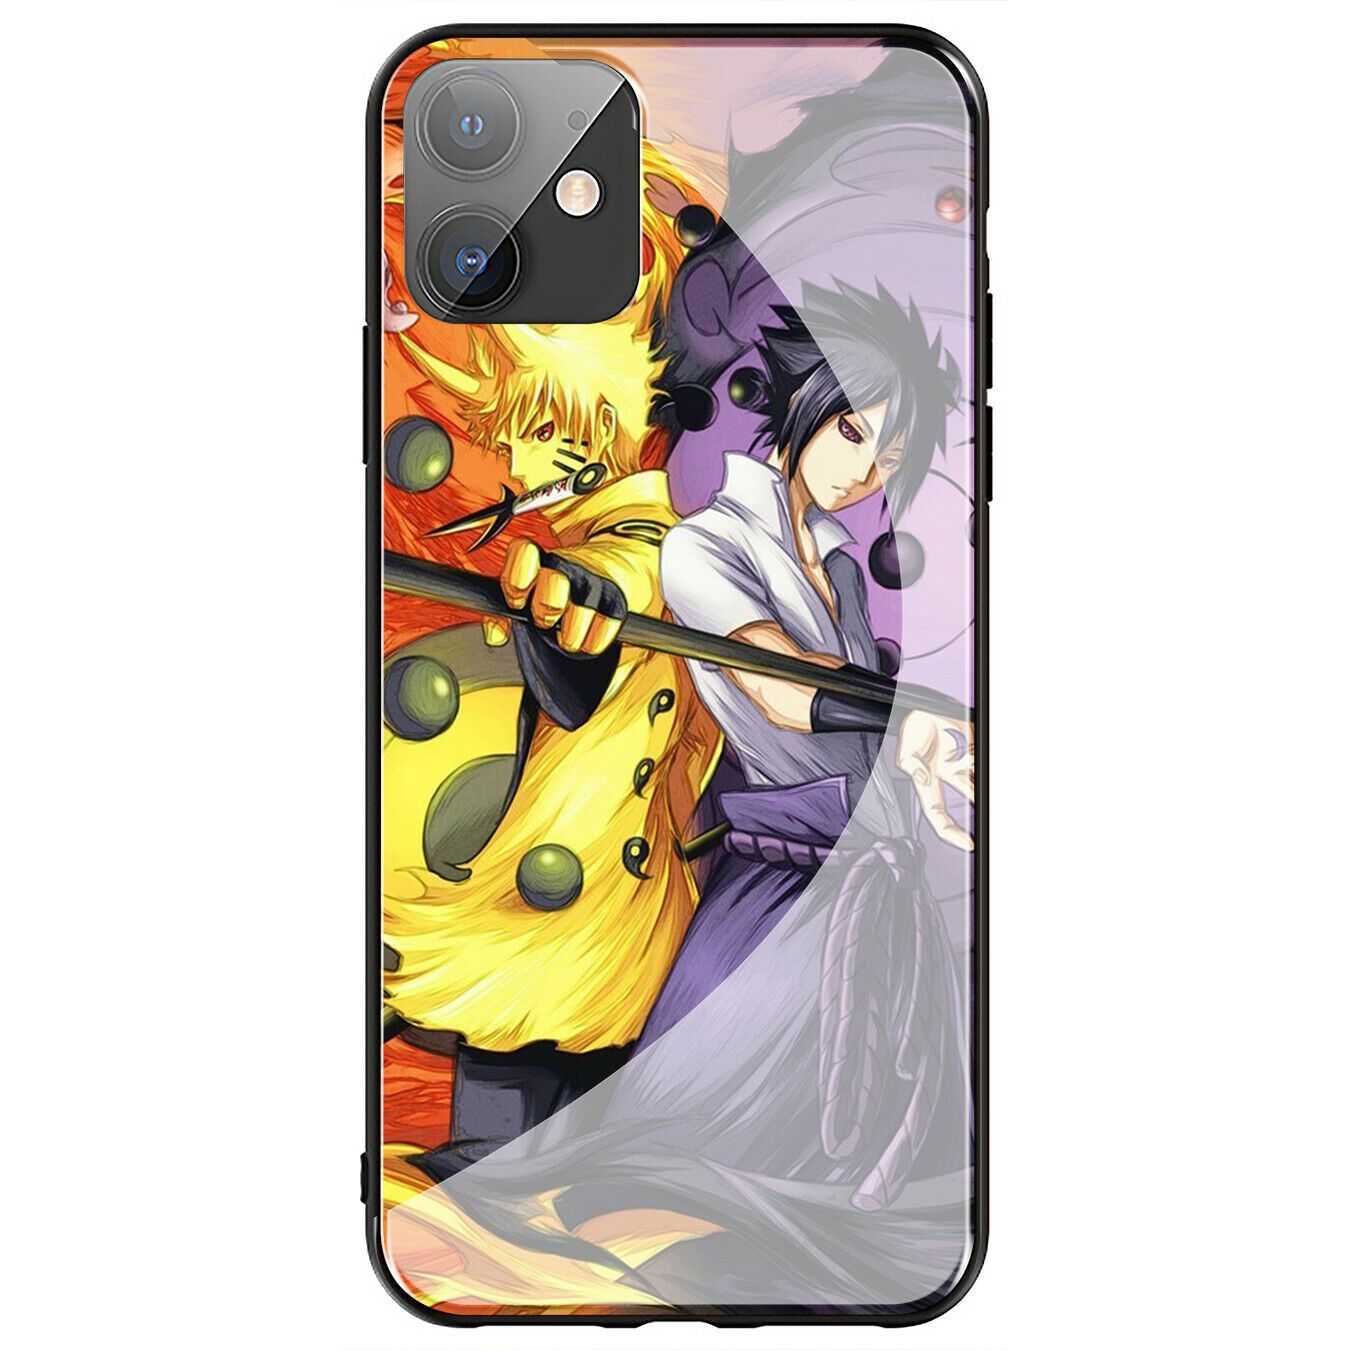 Sasuke NARUTO Akatsuki Glass Case for iPhone 11 Pro XR X XS Max 8 7 6 6s Plus + iPhone Cases AtlasCase 4 for iPhone 6/6S 